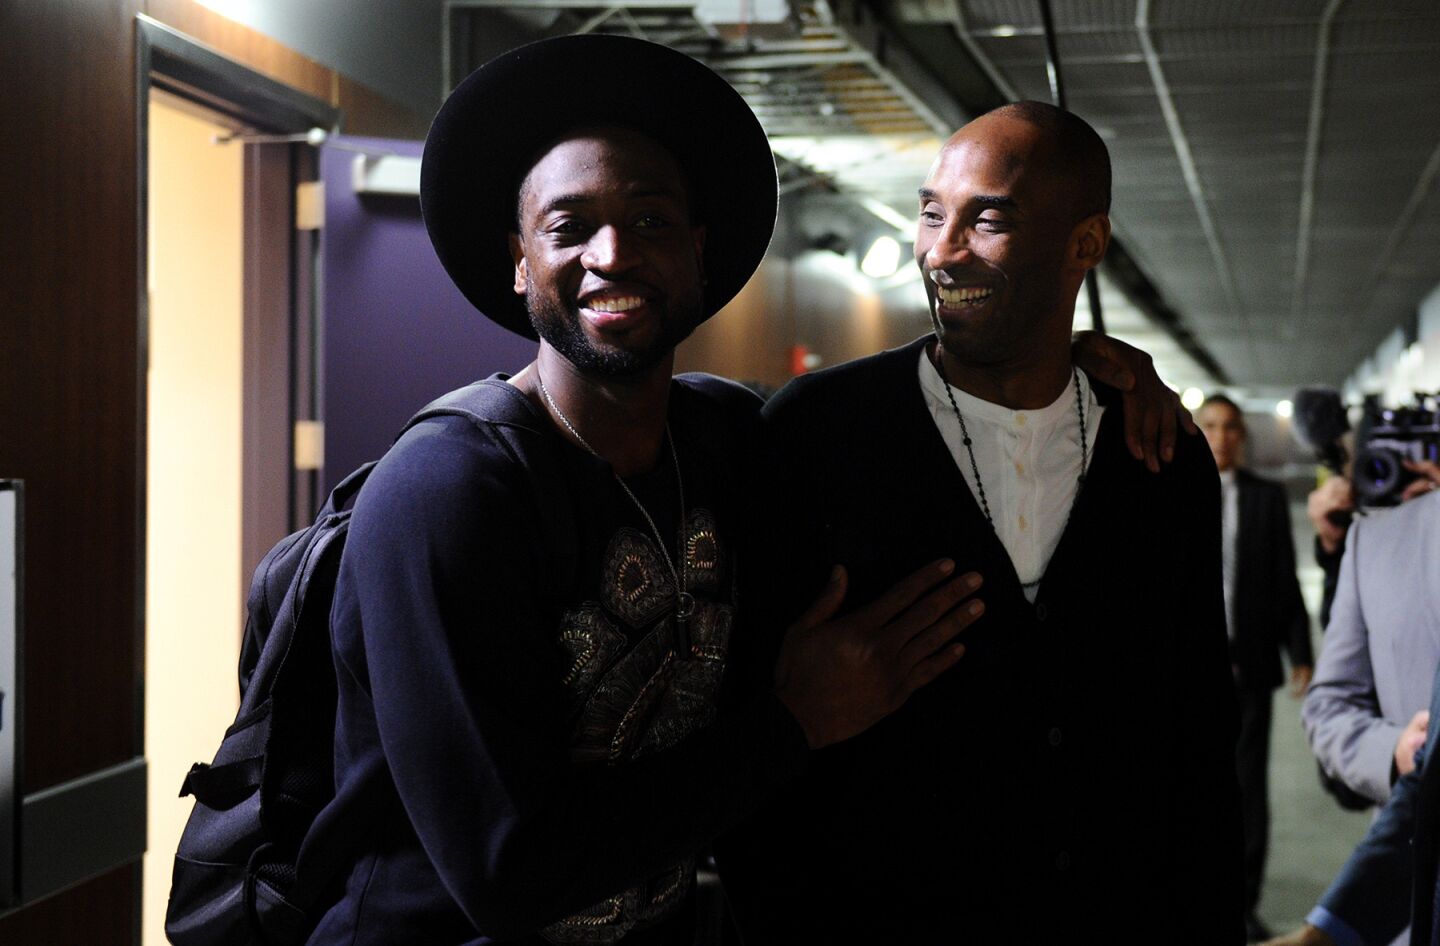 The Miami Heat's Dwyane Wade, left, and Kobe Bryant share a laugh after a game at Staples Center on March 30.